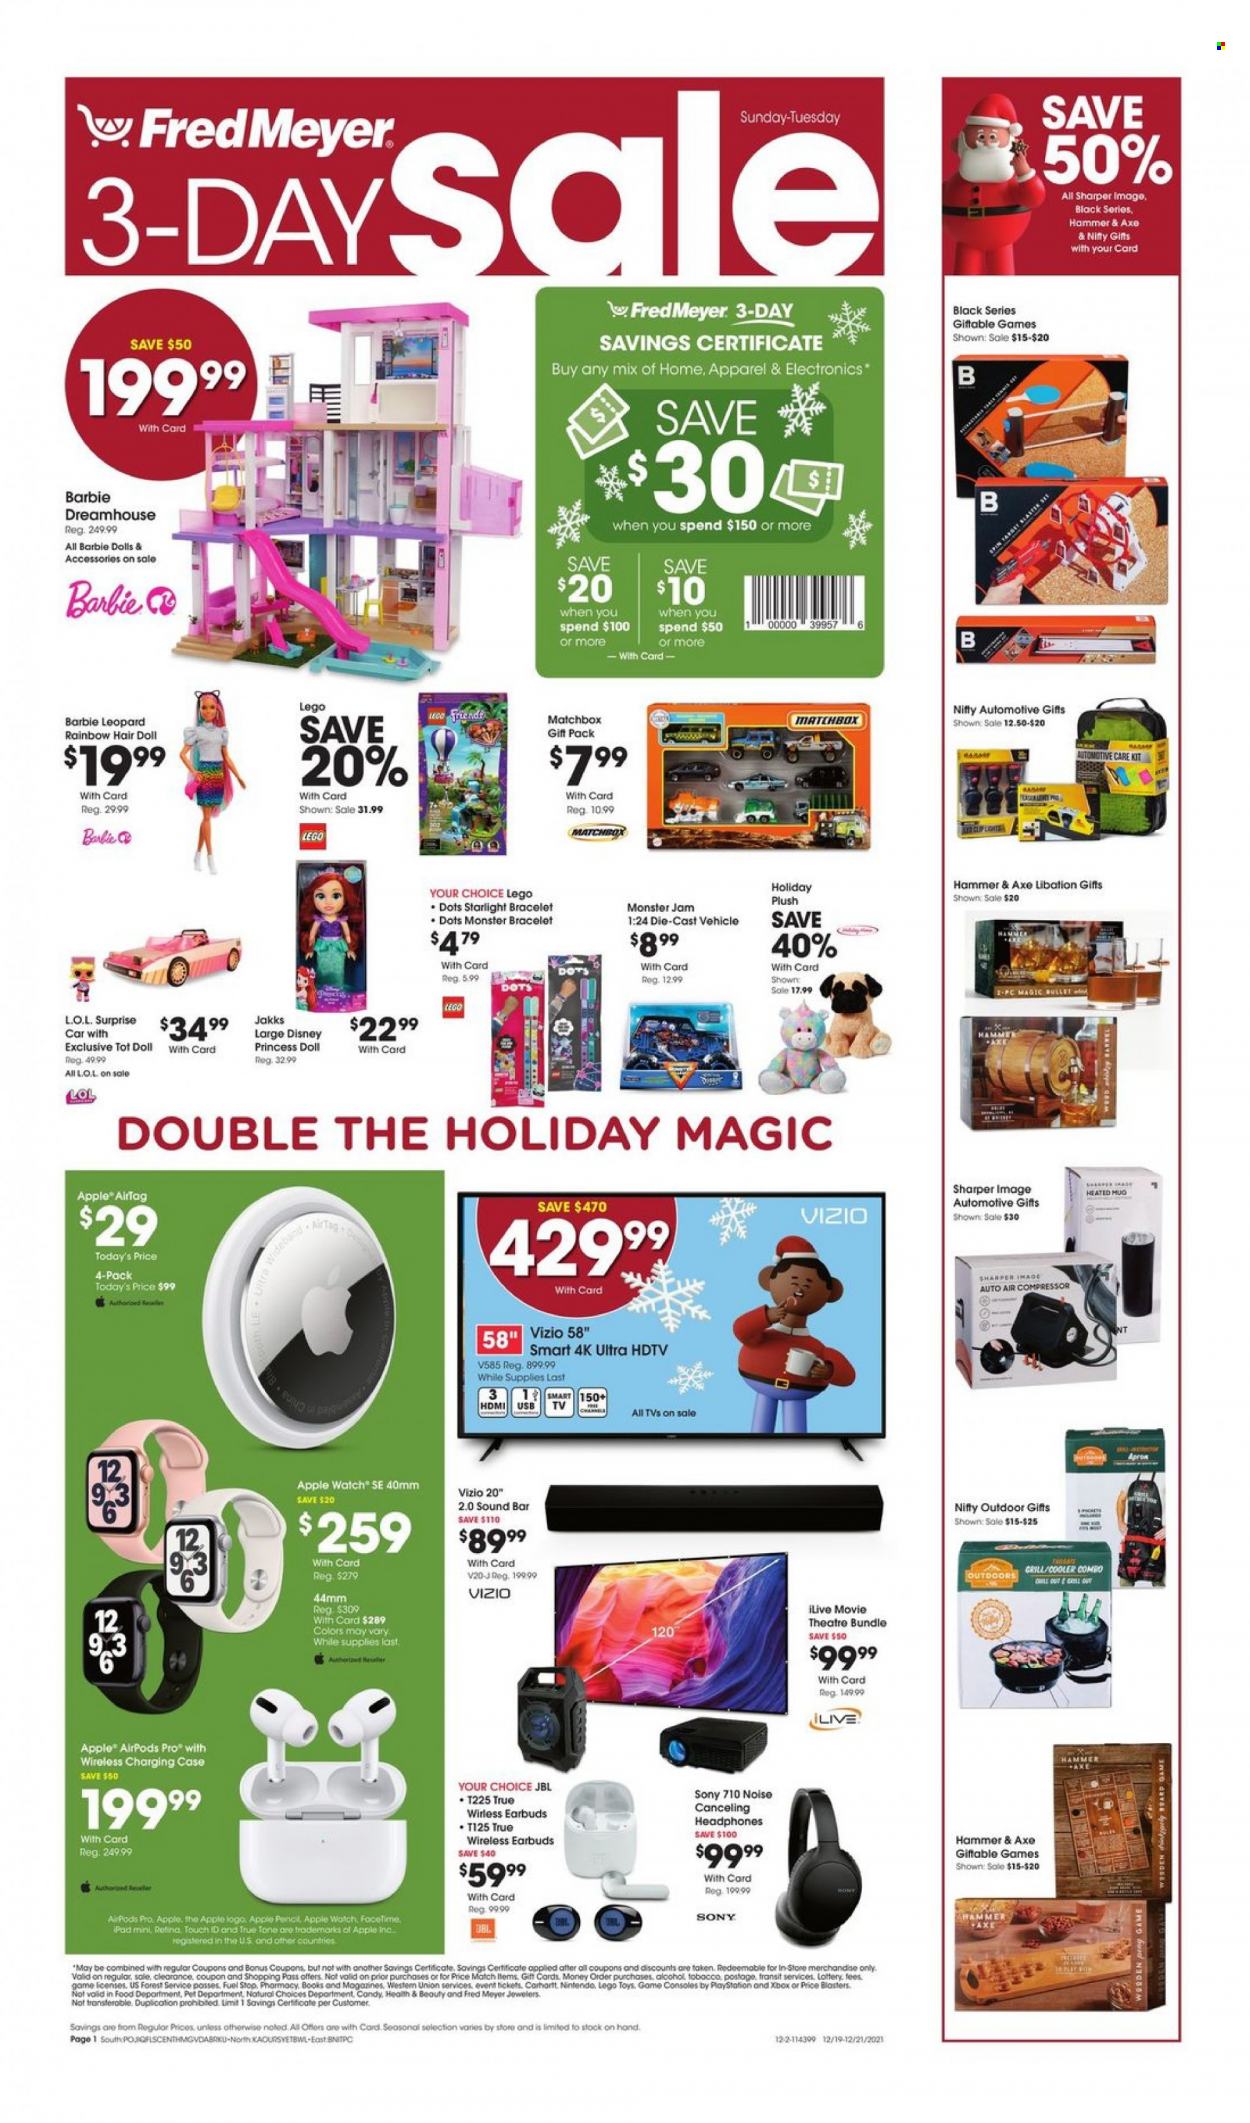 thumbnail - Fred Meyer Flyer - 12/19/2021 - 12/21/2021 - Sales products - Sony, Vizio, Disney, Monster, Barbie, pencil, book, Apple Watch, Apple Watch SE, Apple Pencil, PlayStation, Xbox, HDTV, TV, JBL, sound bar, headphones, Airpods, earbuds, Apple AirPods Pro, bracelet, watch, doll, LEGO, Matchbox, toys, vehicle, hammer, princess, L.O.L. Surprise, air compressor. Page 1.